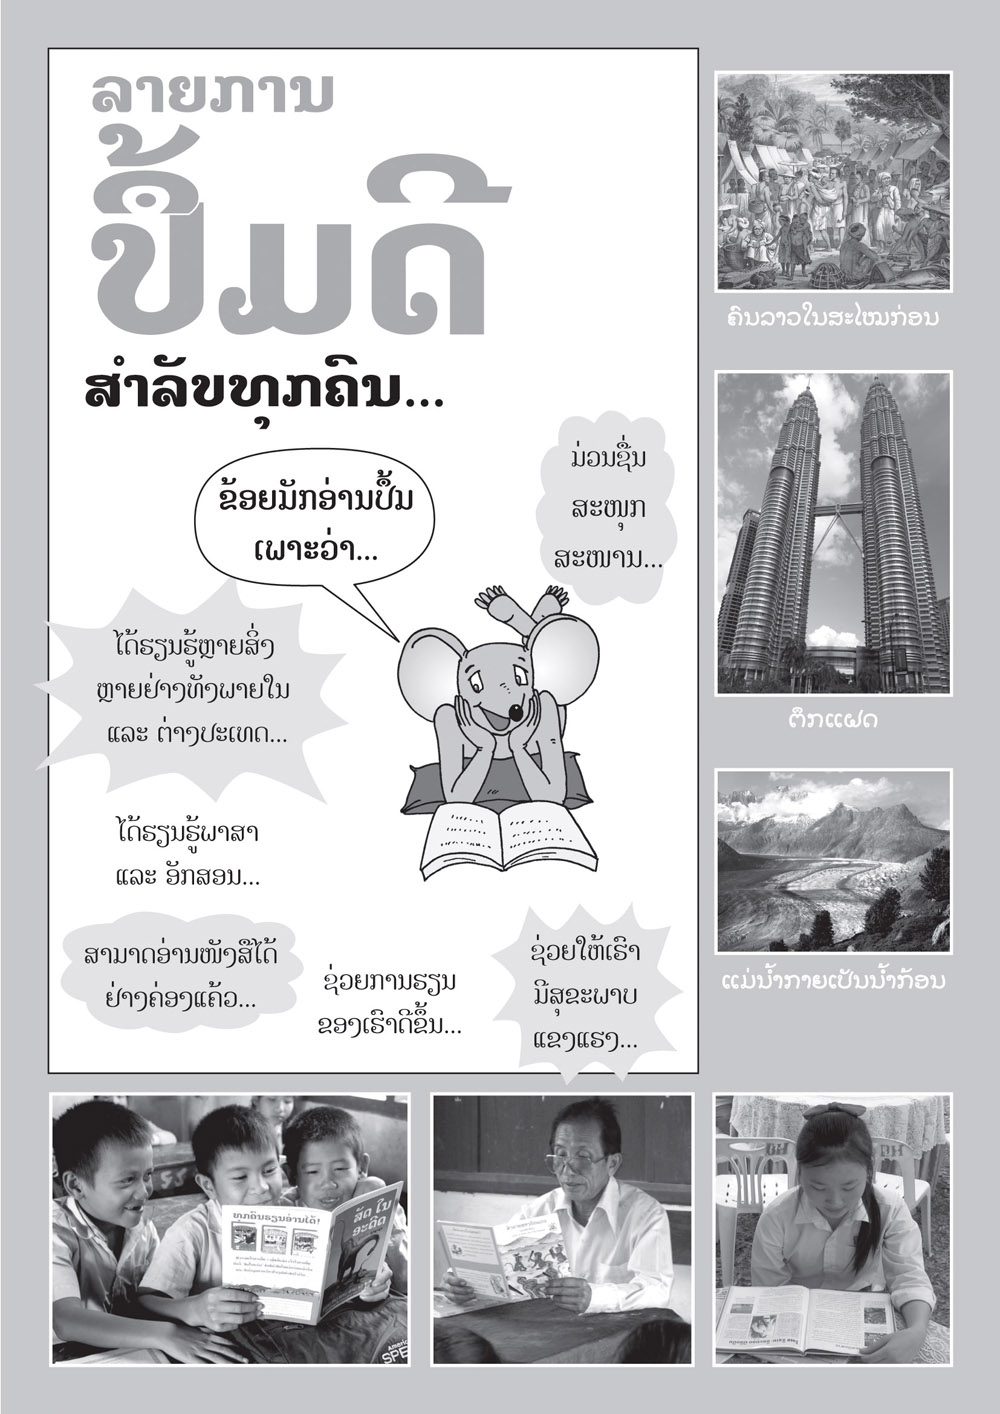 High School catalog large book cover, published in Lao language